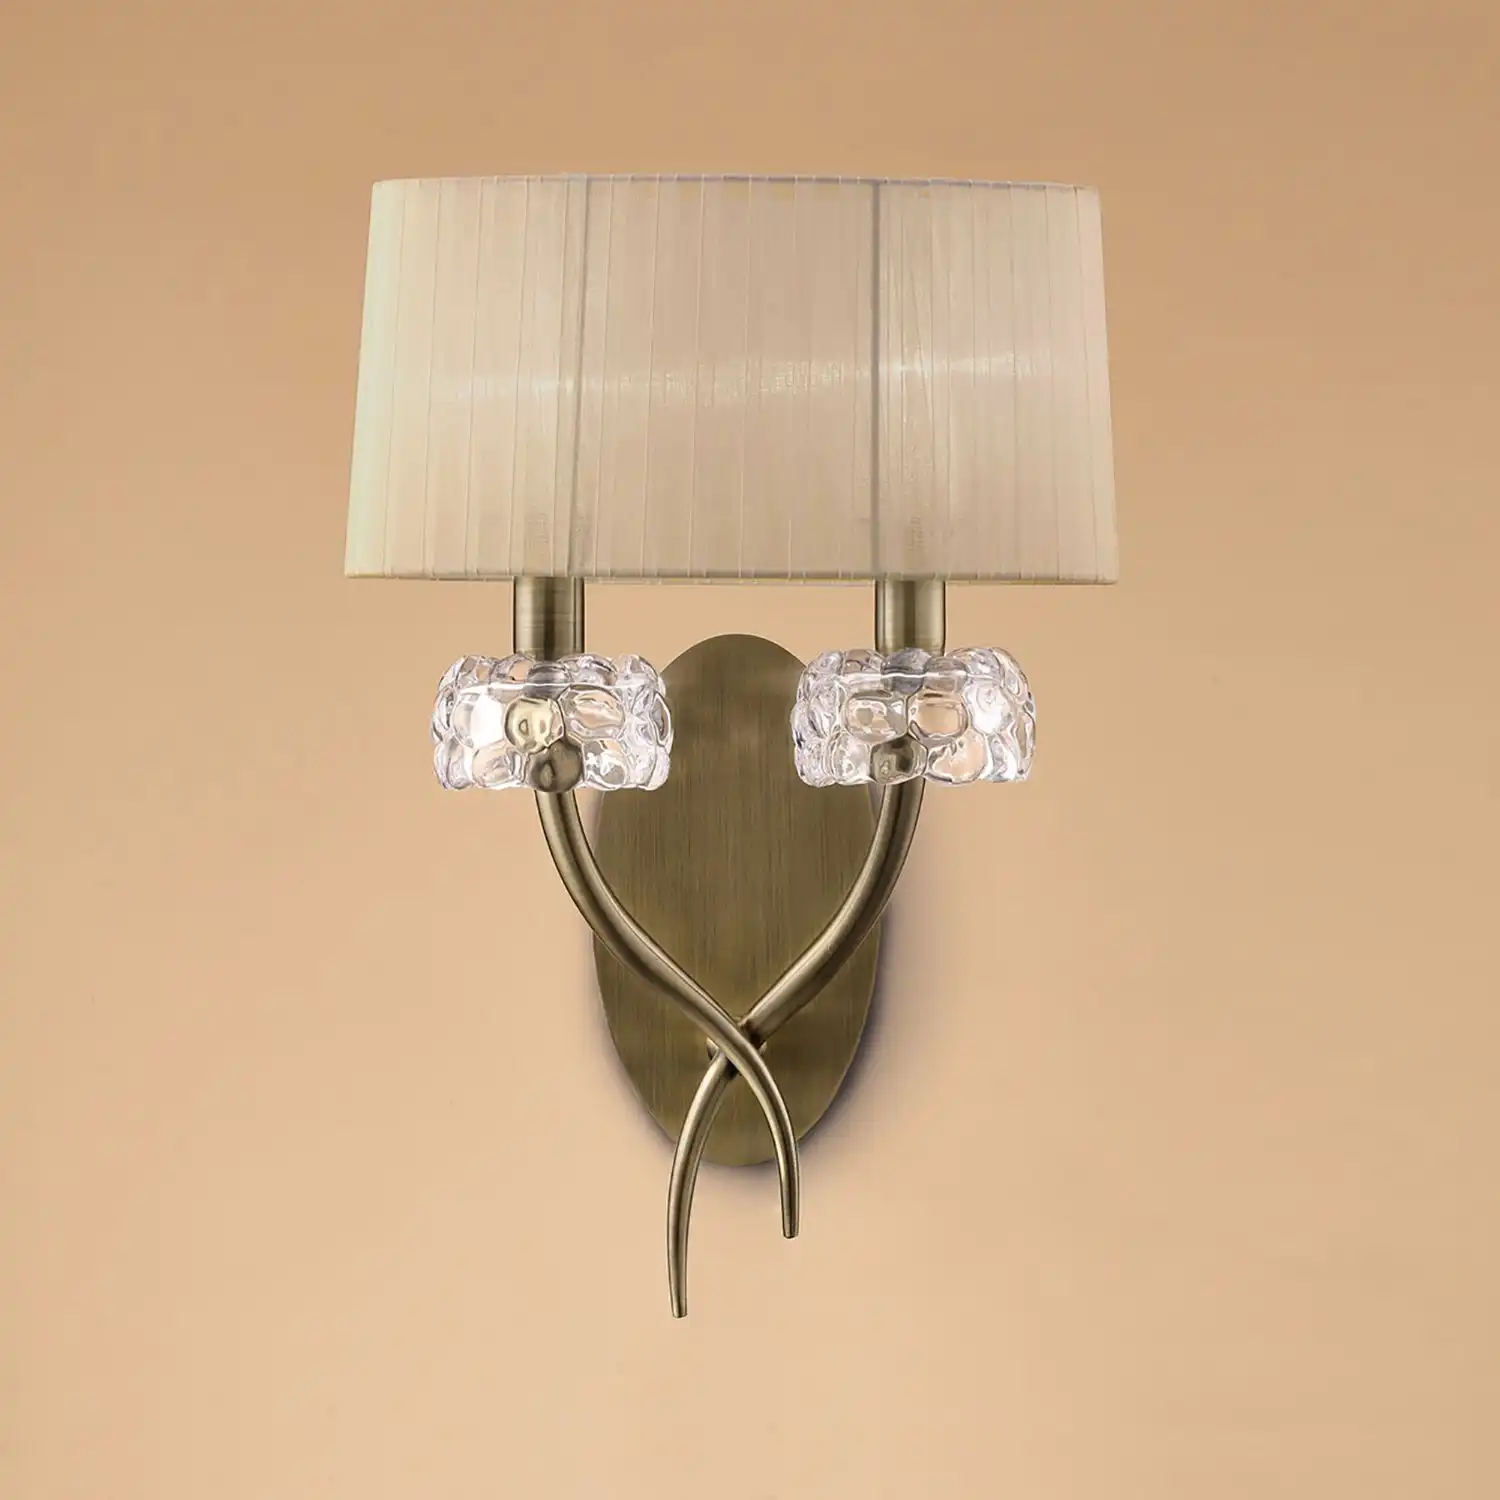 Loewe Wall Lamp Switched 2 Light E14, Antique Brass With Soft Bronze Shade